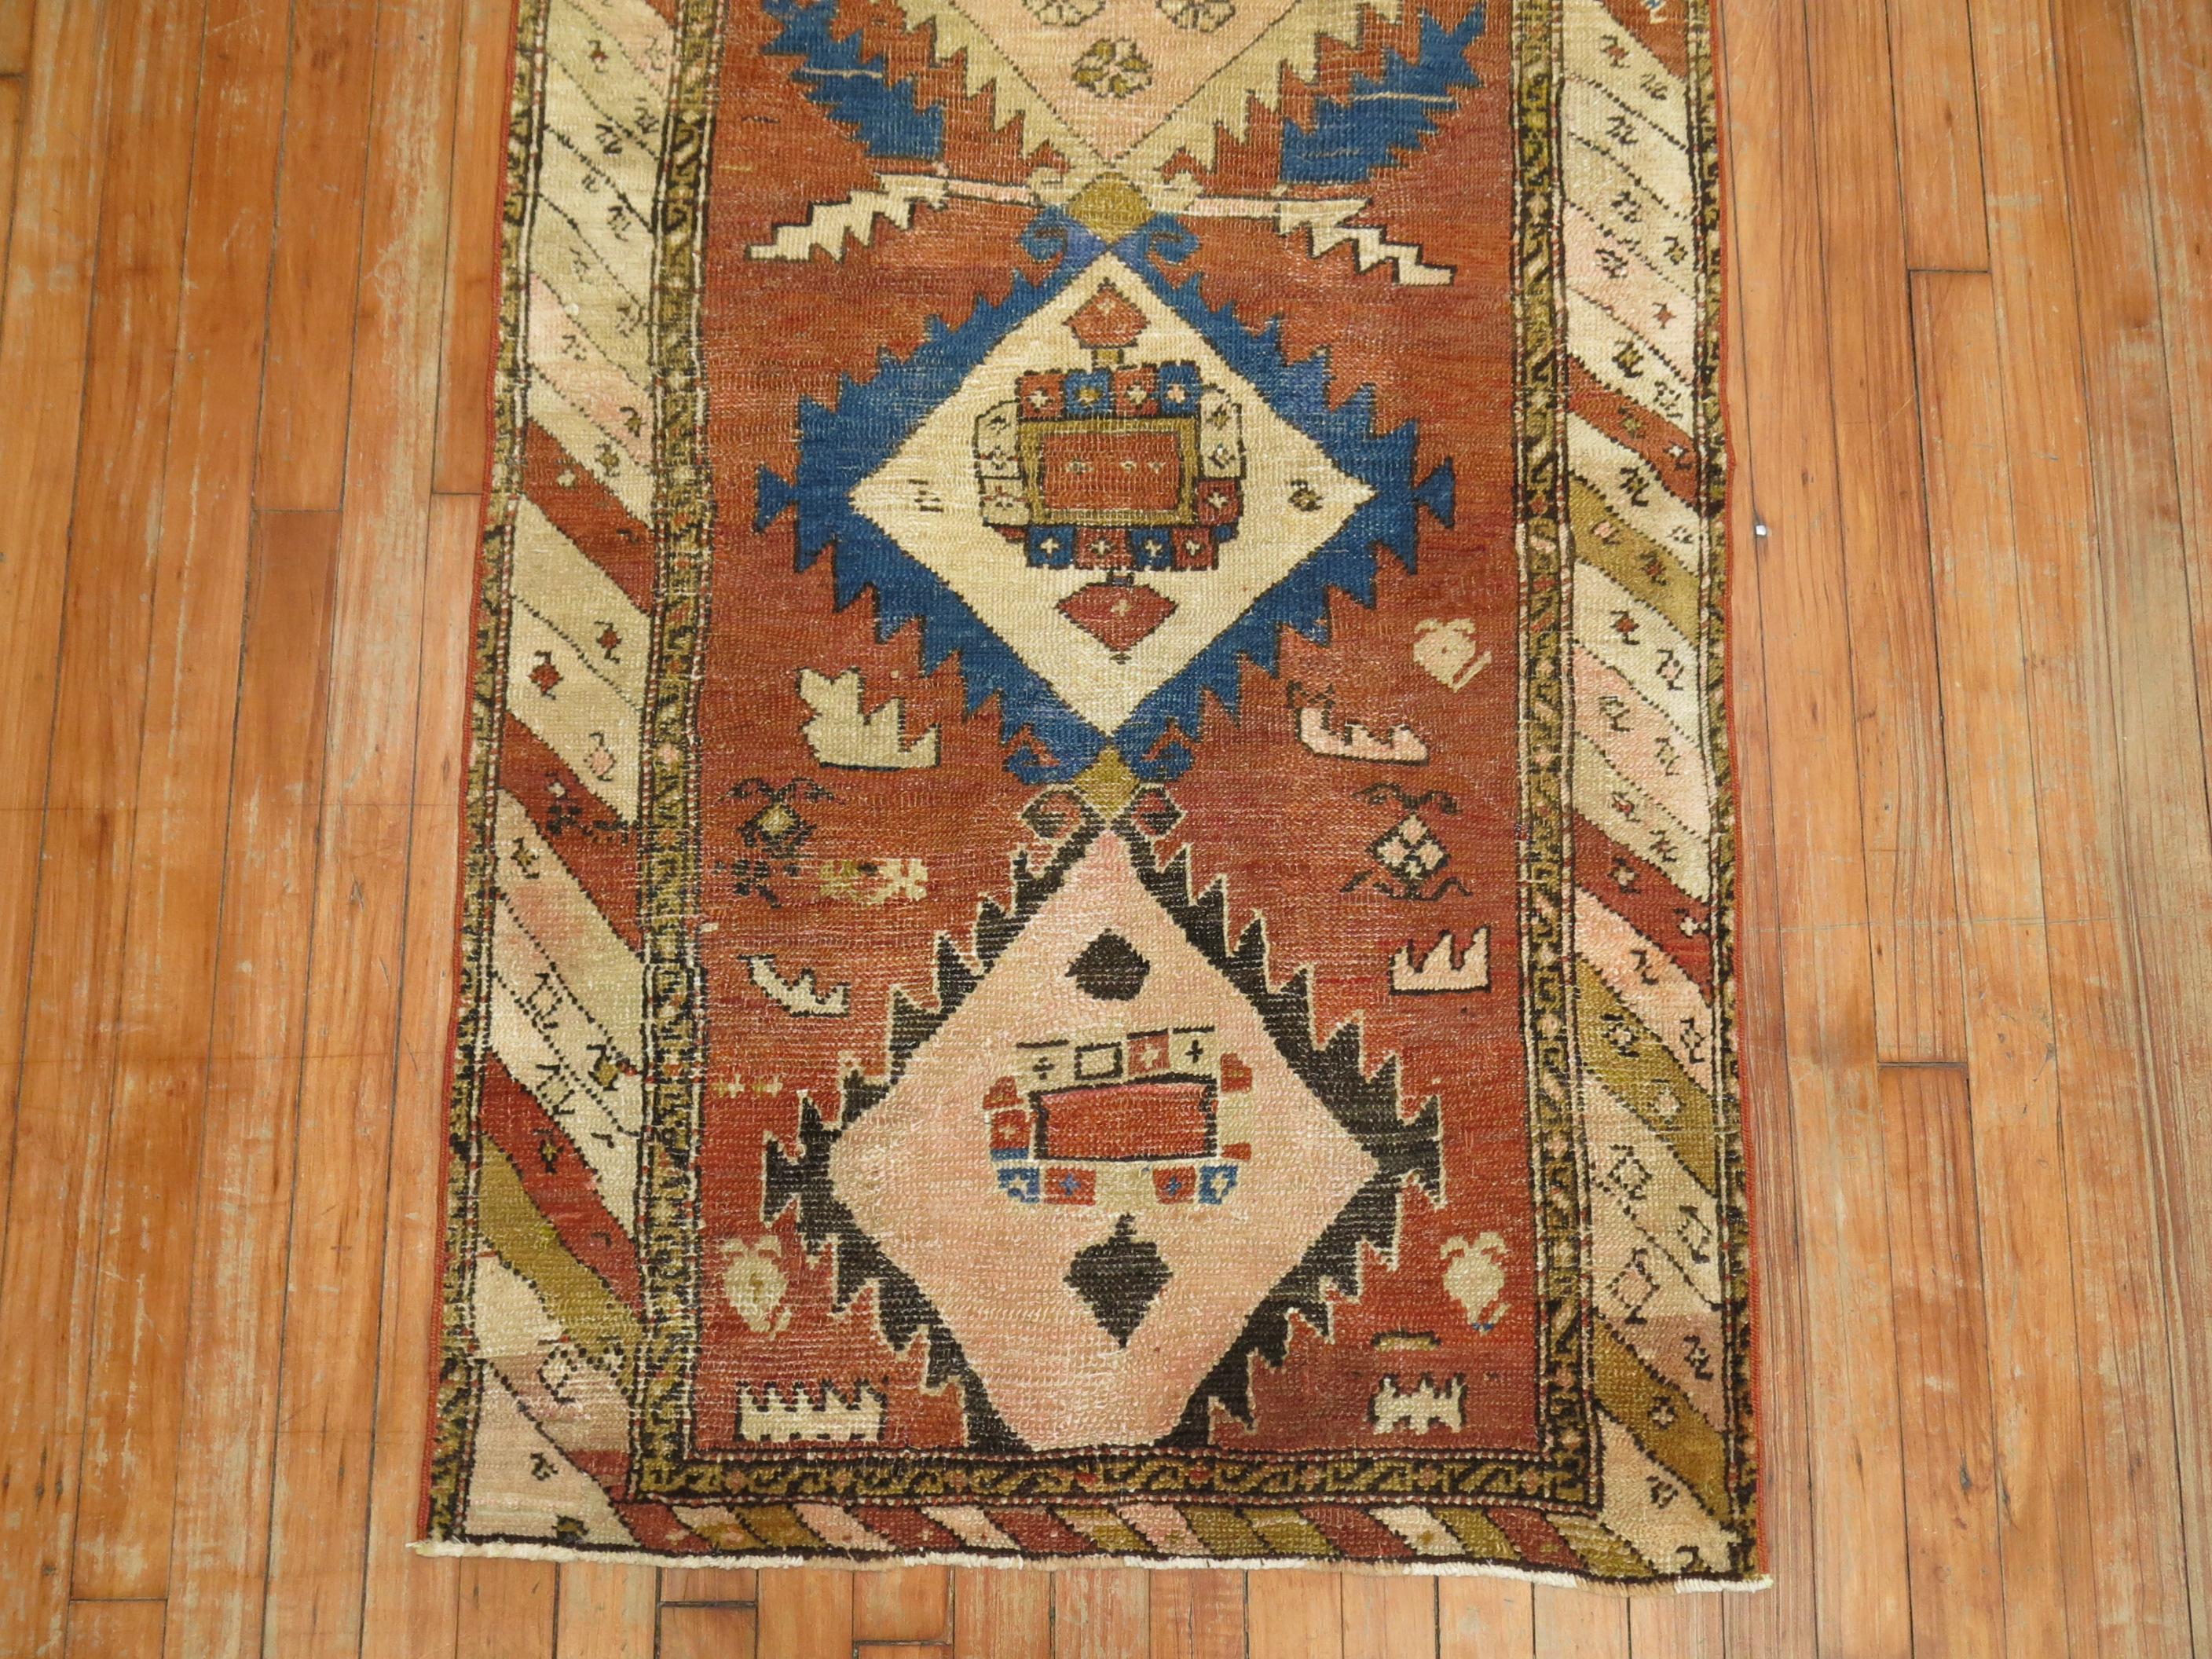 Hand-Woven Late 19th century Tribal Rustic Color Narrow Short Persian Runner